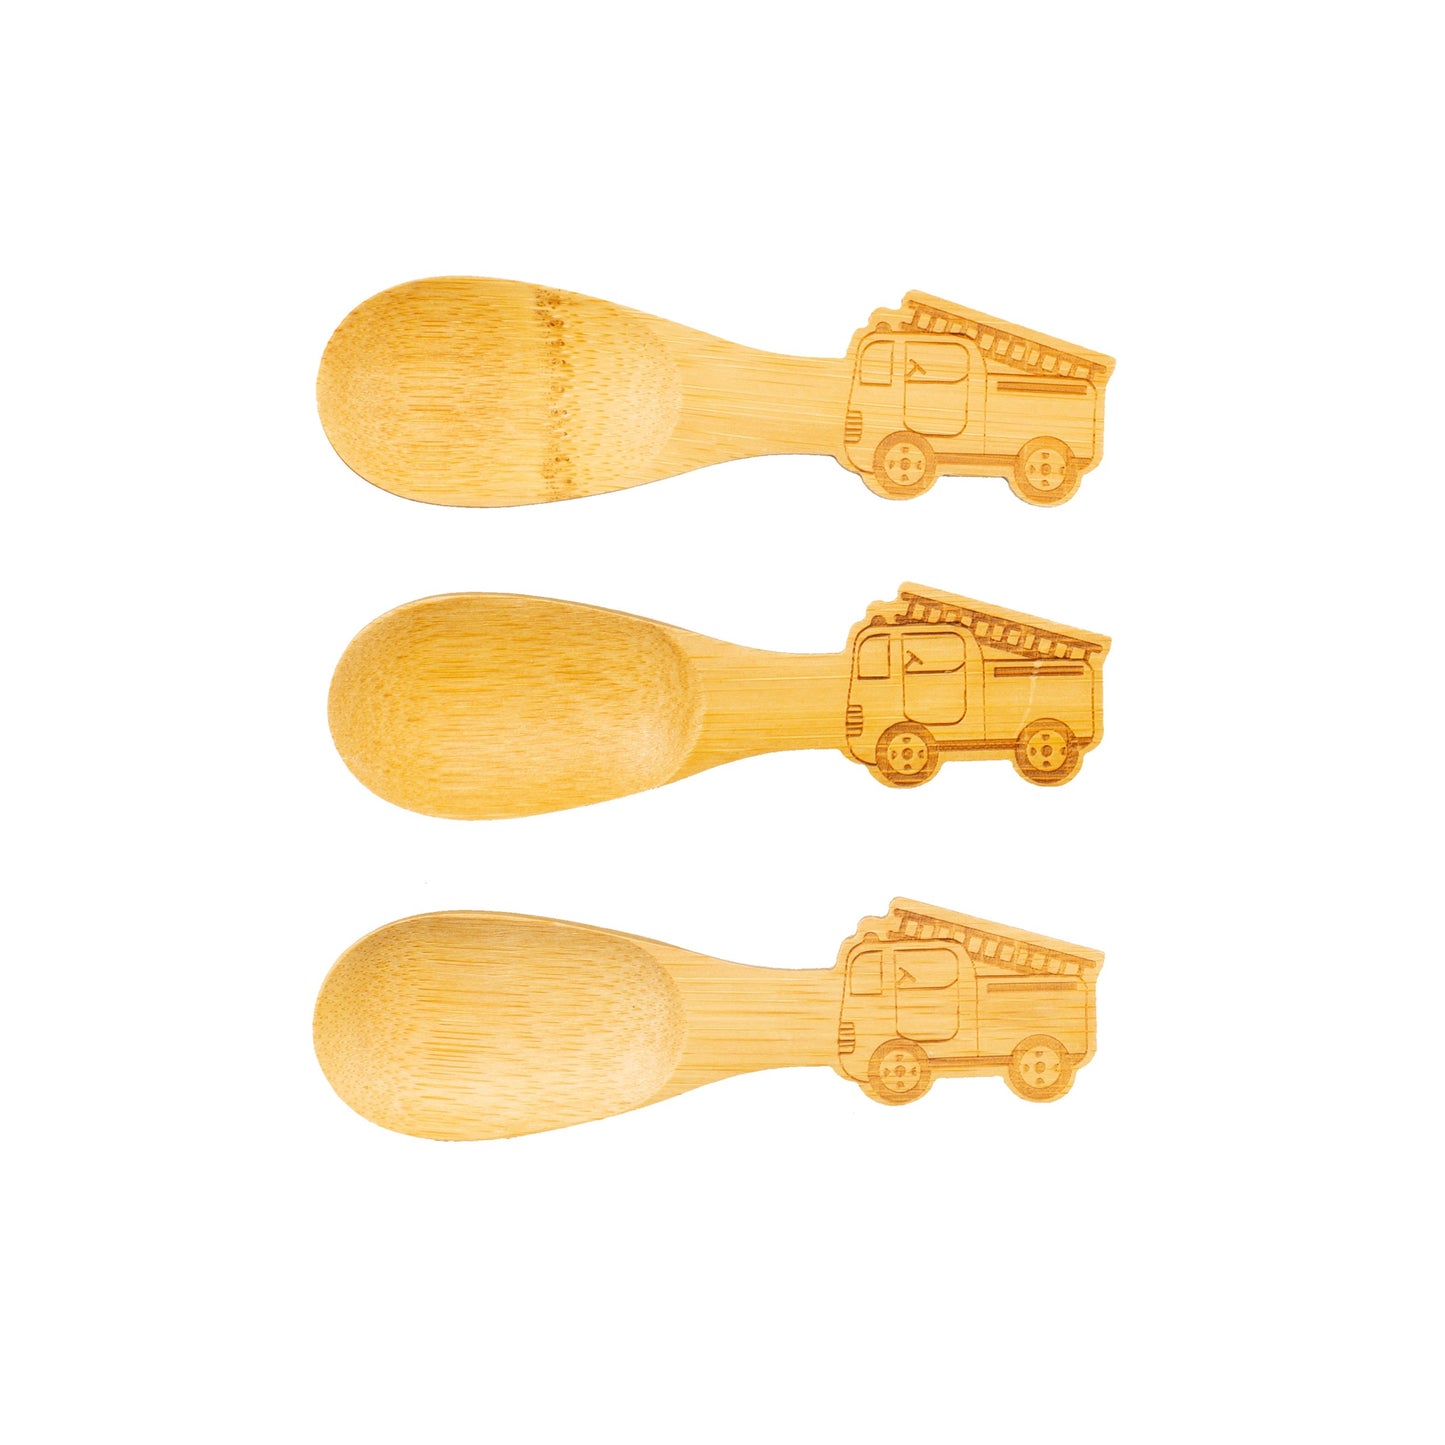 A planet-friendly everyday reusable, this set of 3 bamboo spoons features a fun fire engine design.